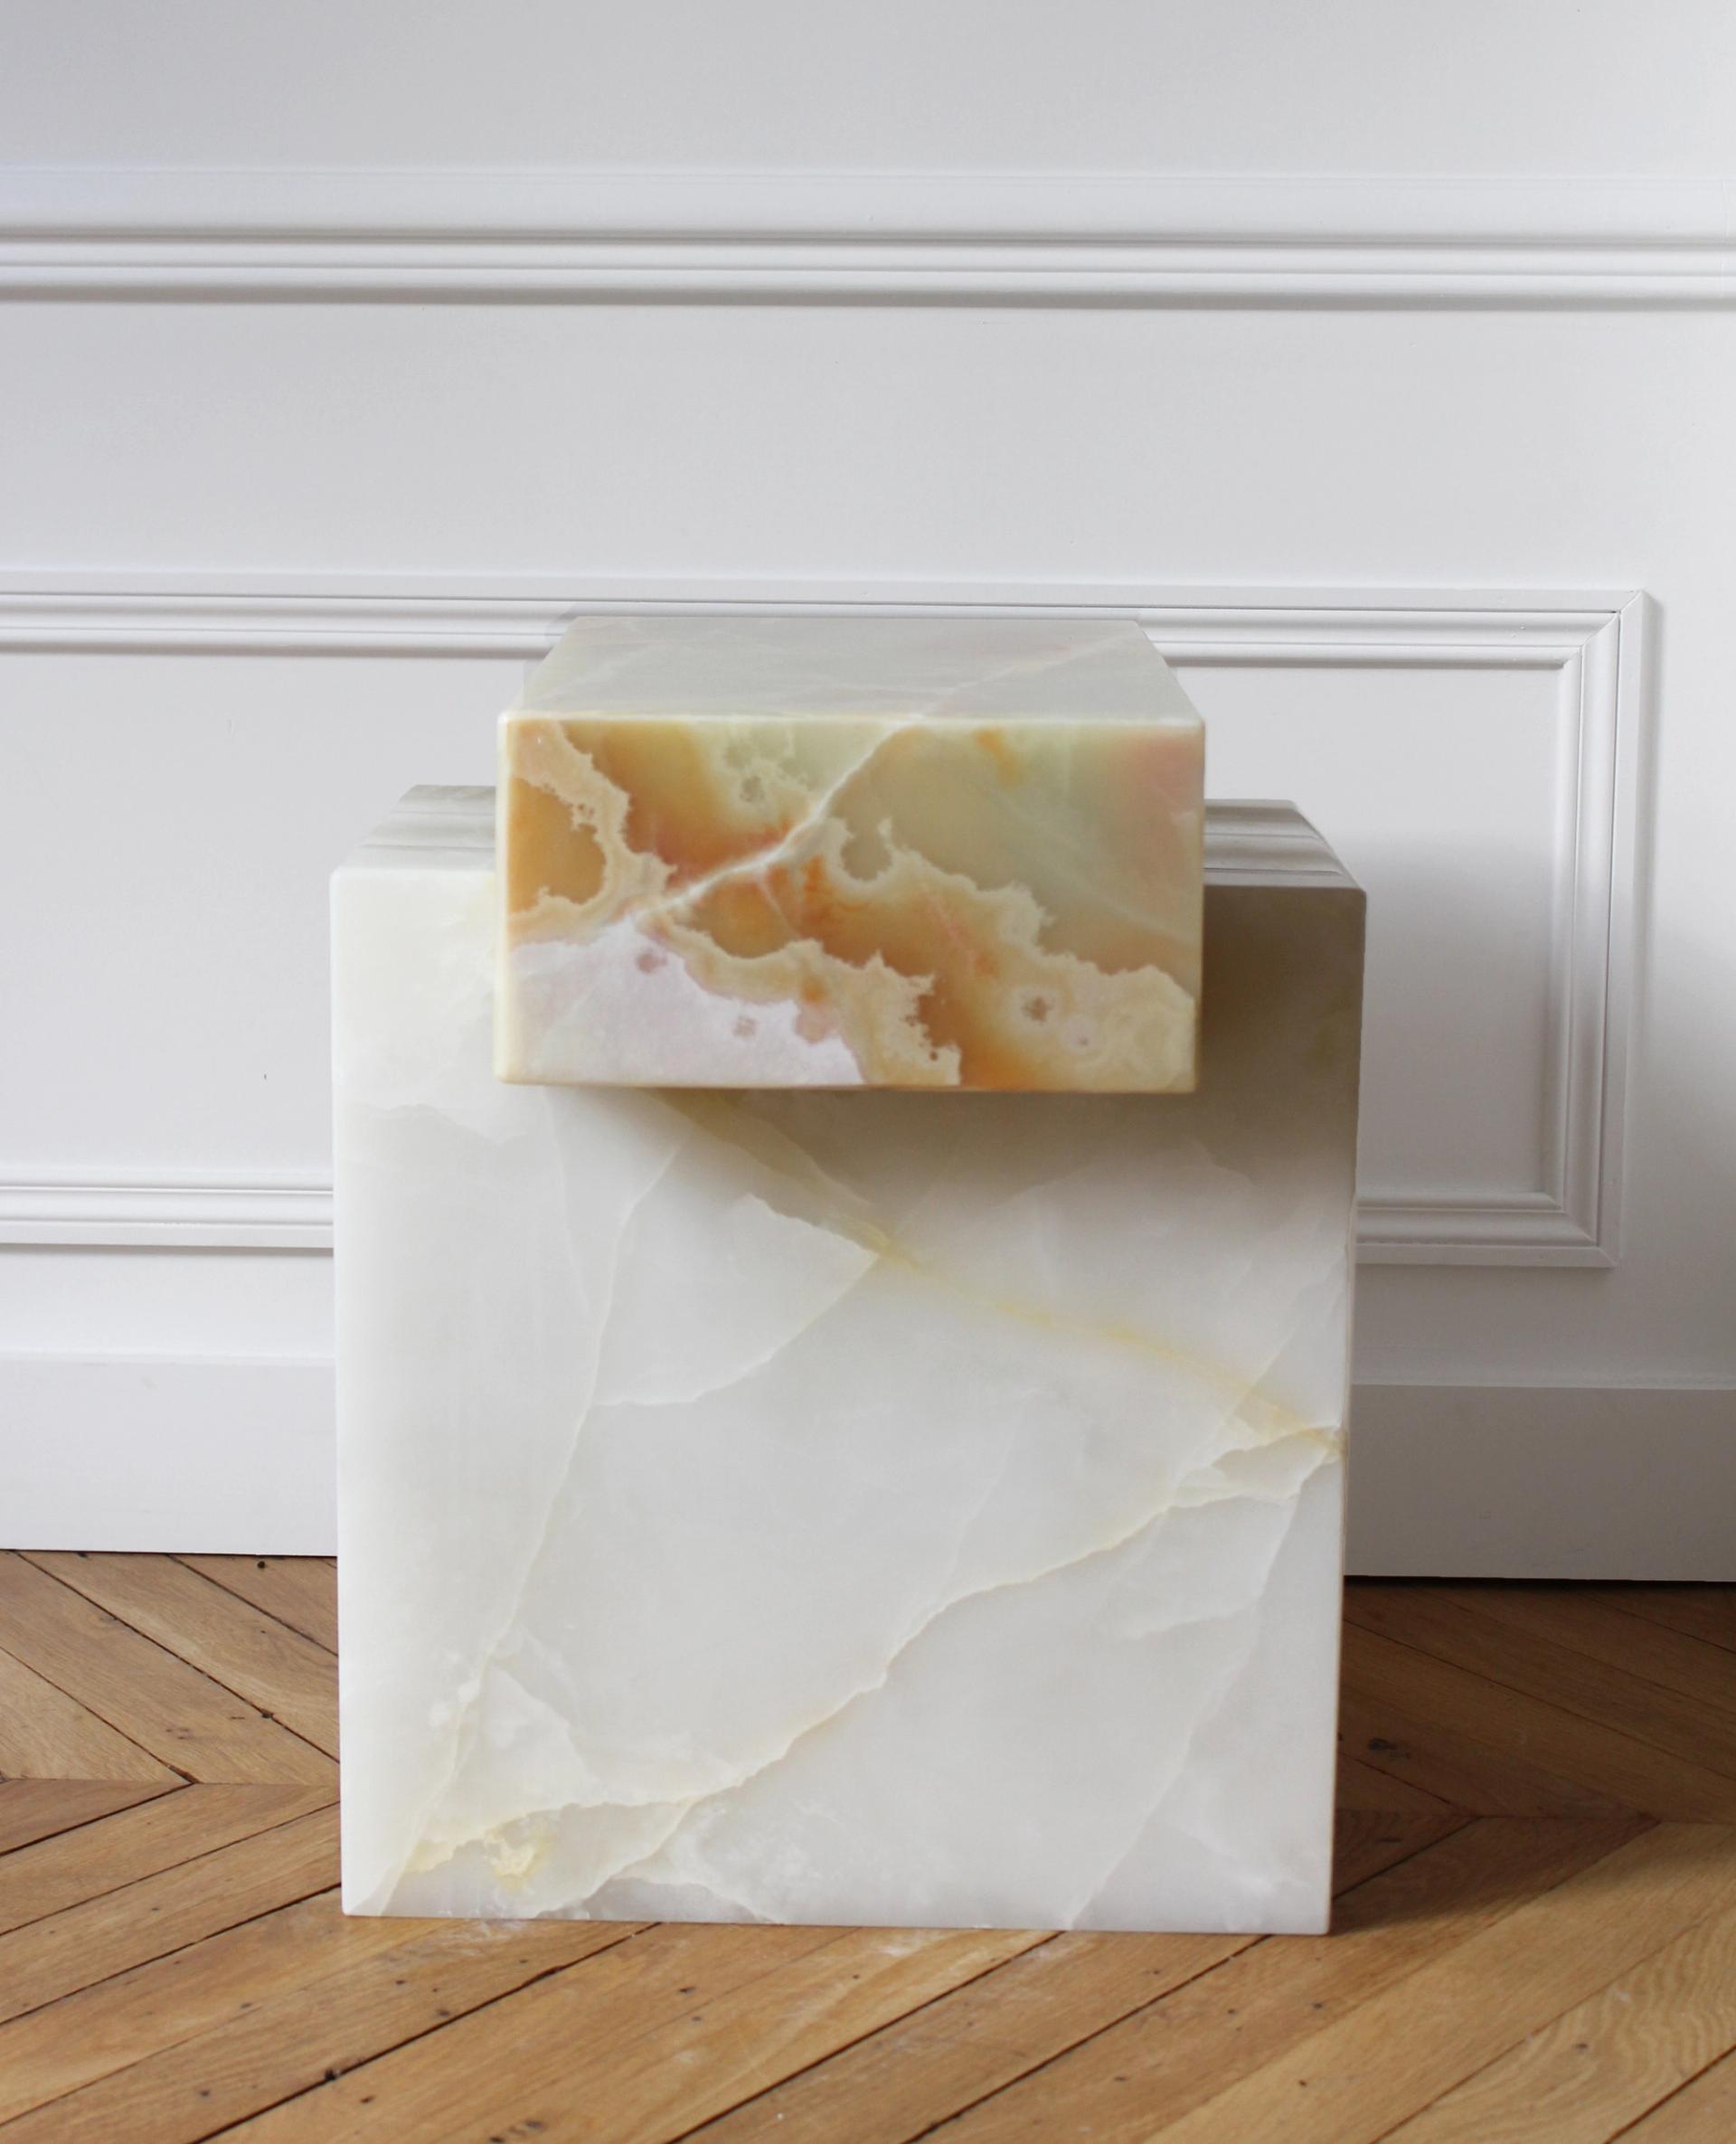 Gaia White and Green Onyx Side Table